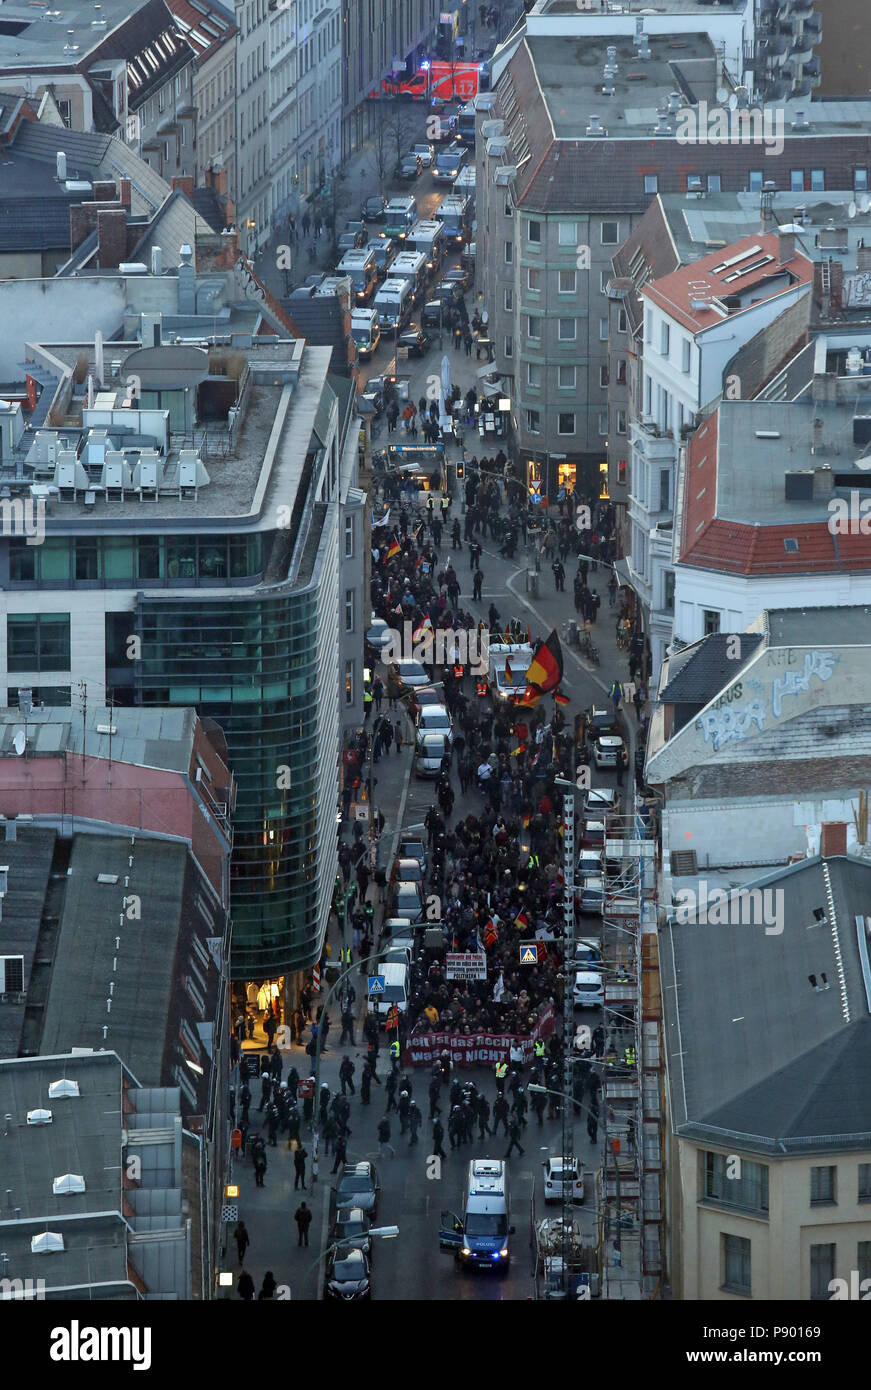 Berlin, Germany, bird's eye view, no to the Groko demonstration train in Muenzstrasse Stock Photo